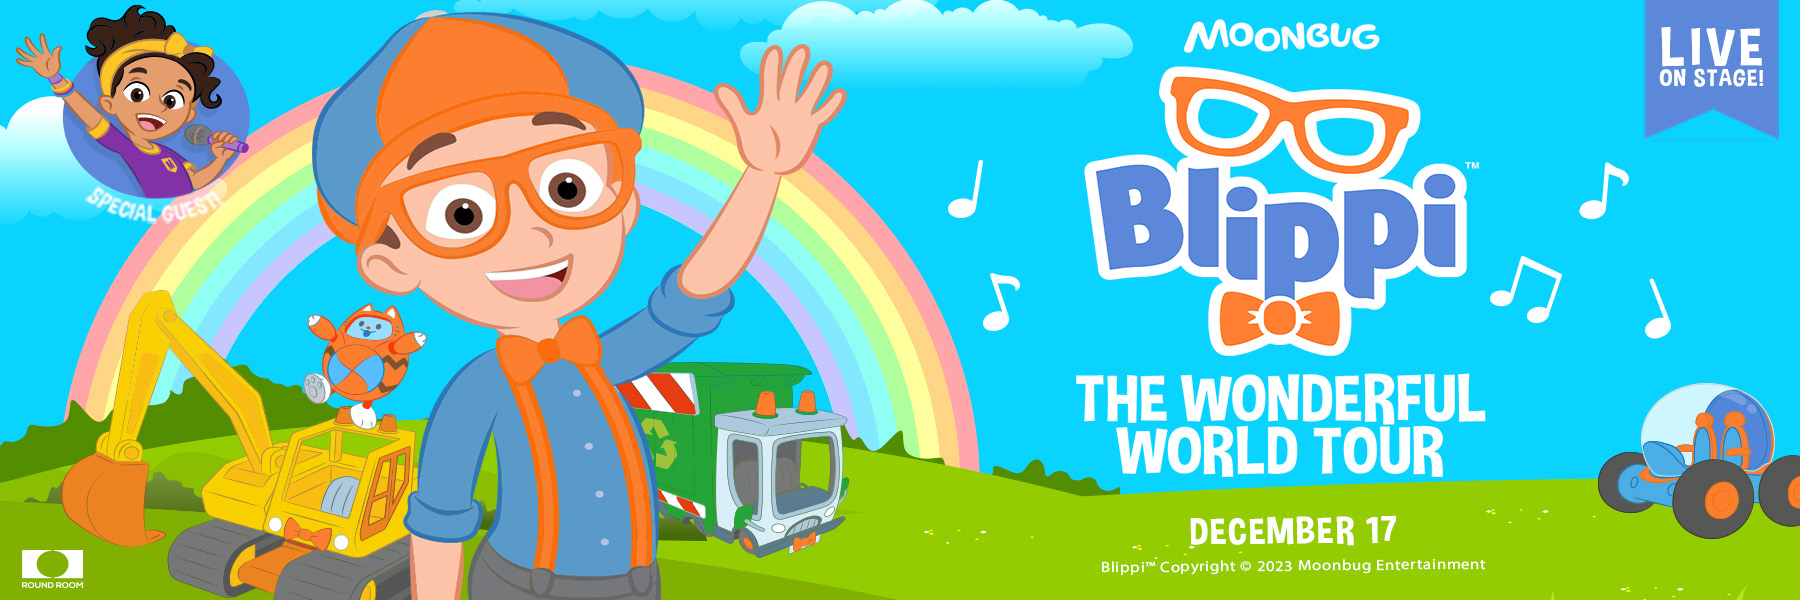 BLIPPI THE WONDERFUL WORLD TOUR Official Box Office Smart Financial Centre